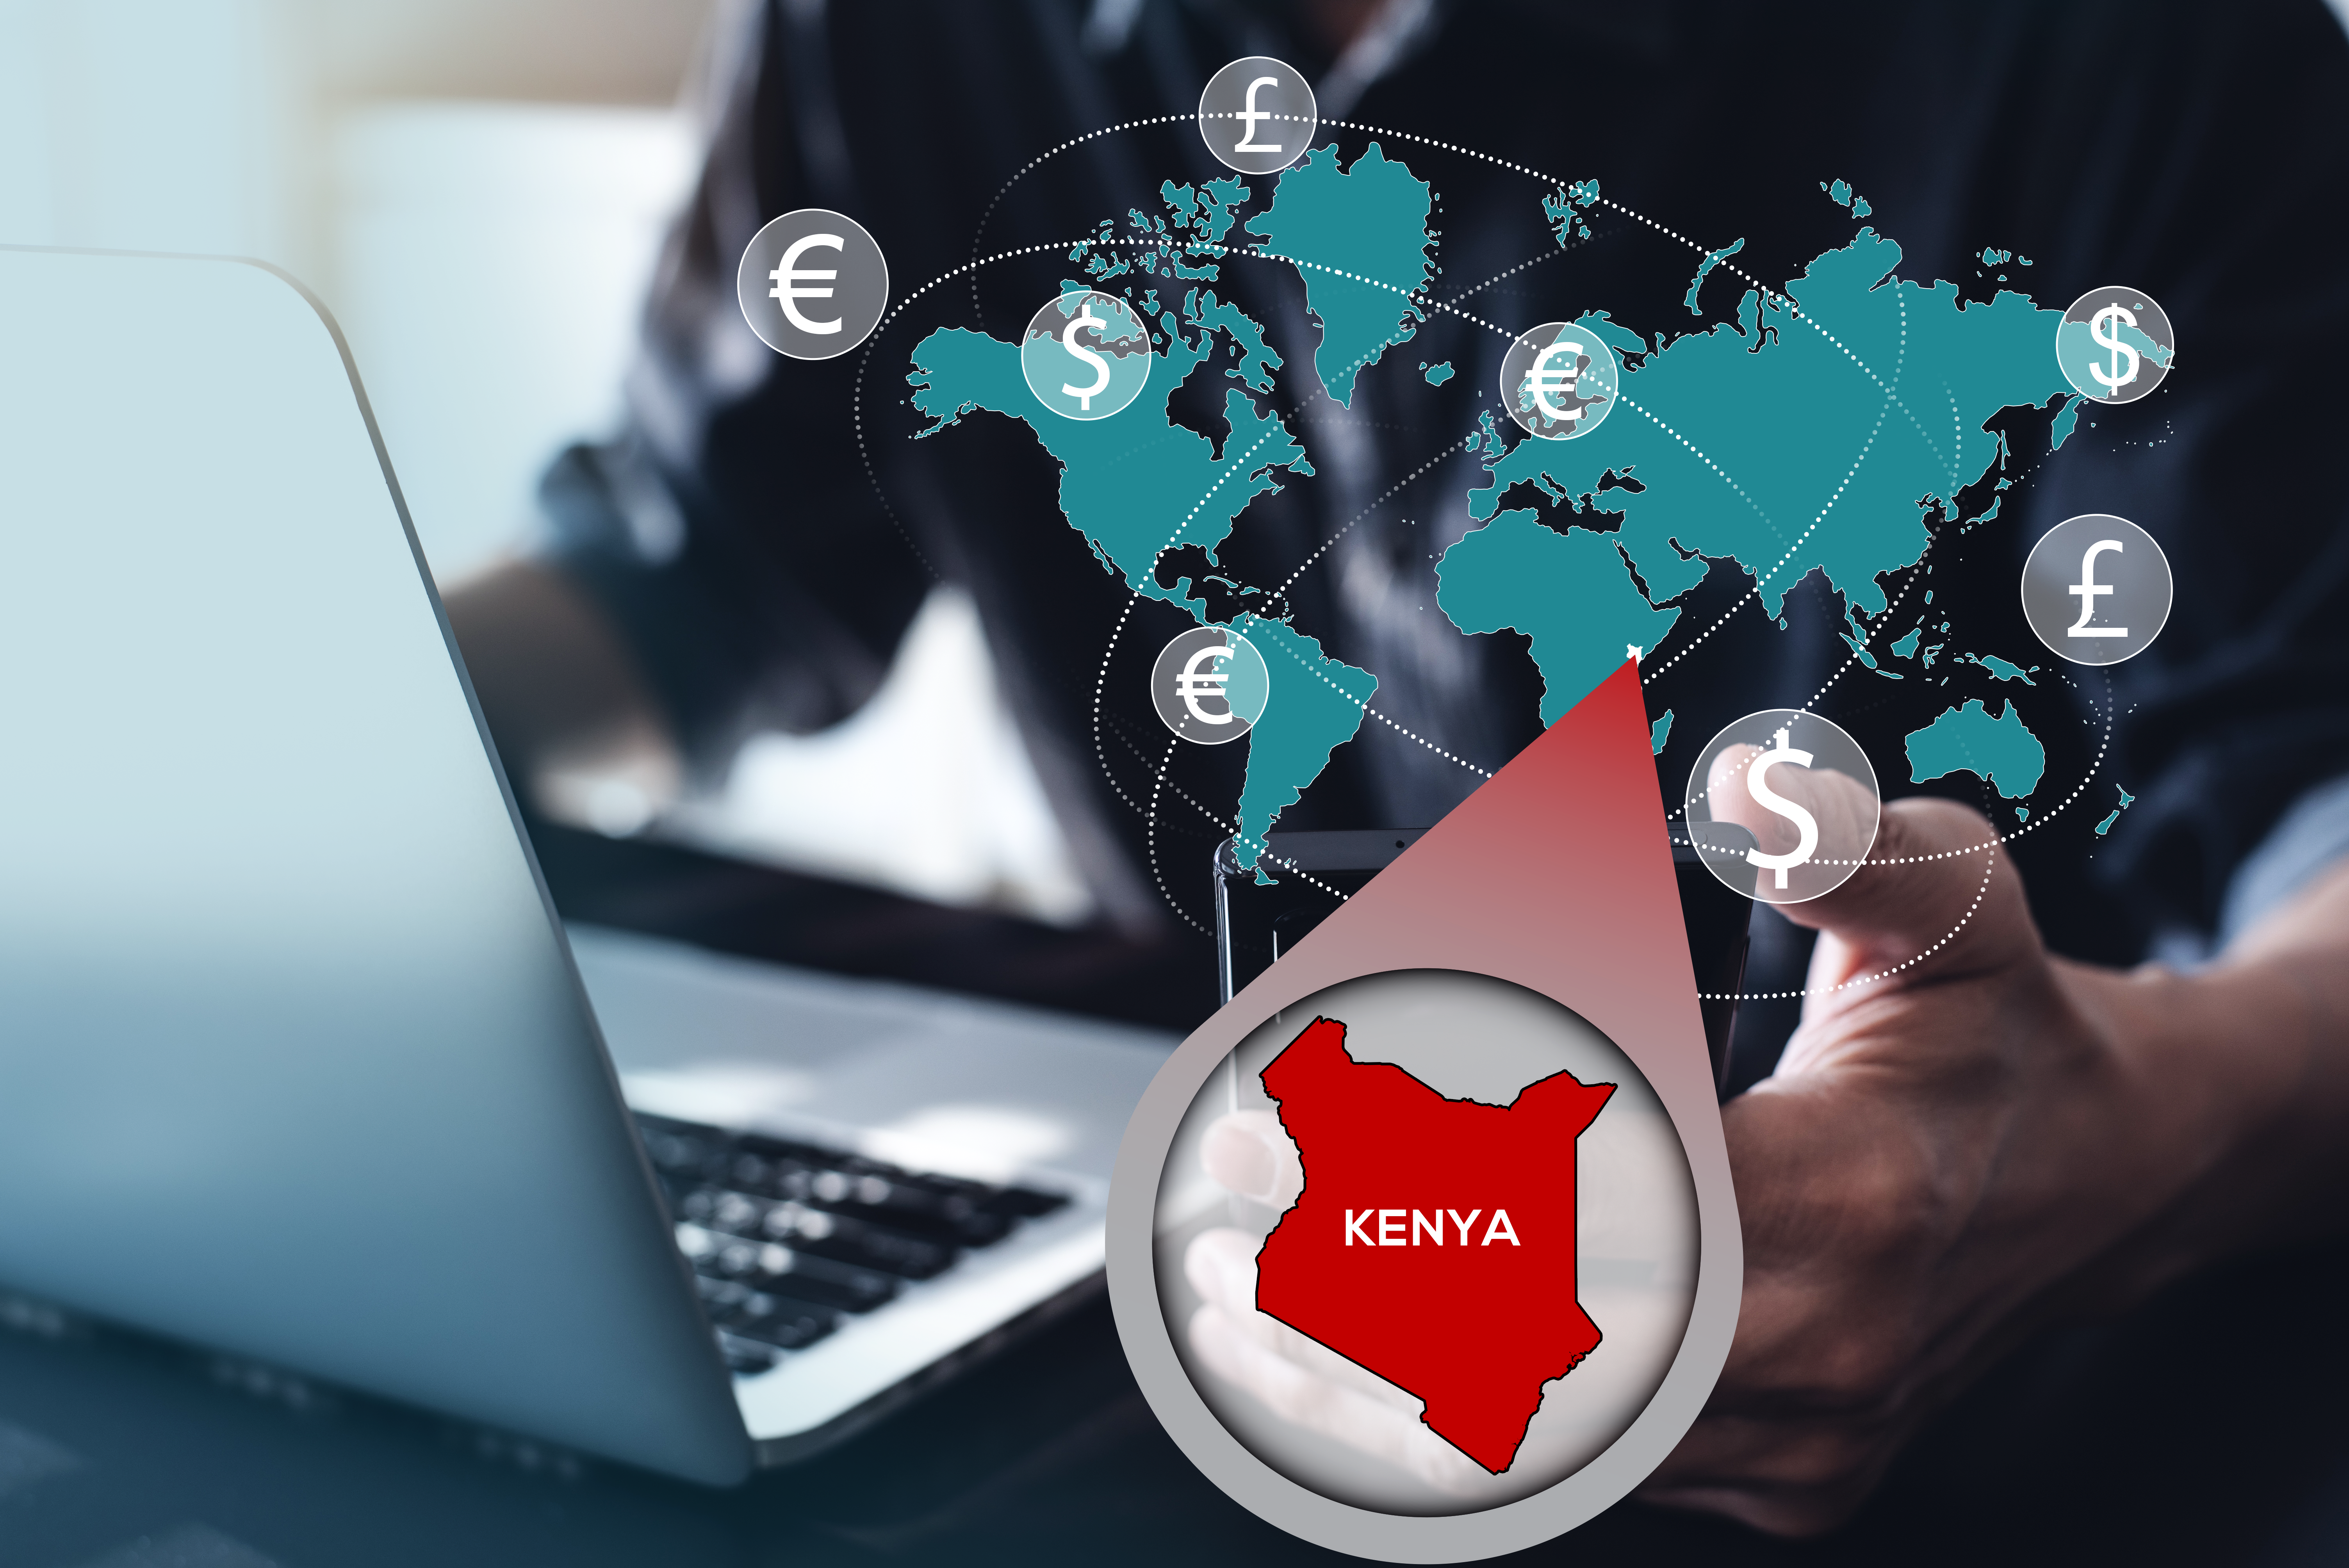 The easiest ways to send money to family and friends in Kenya